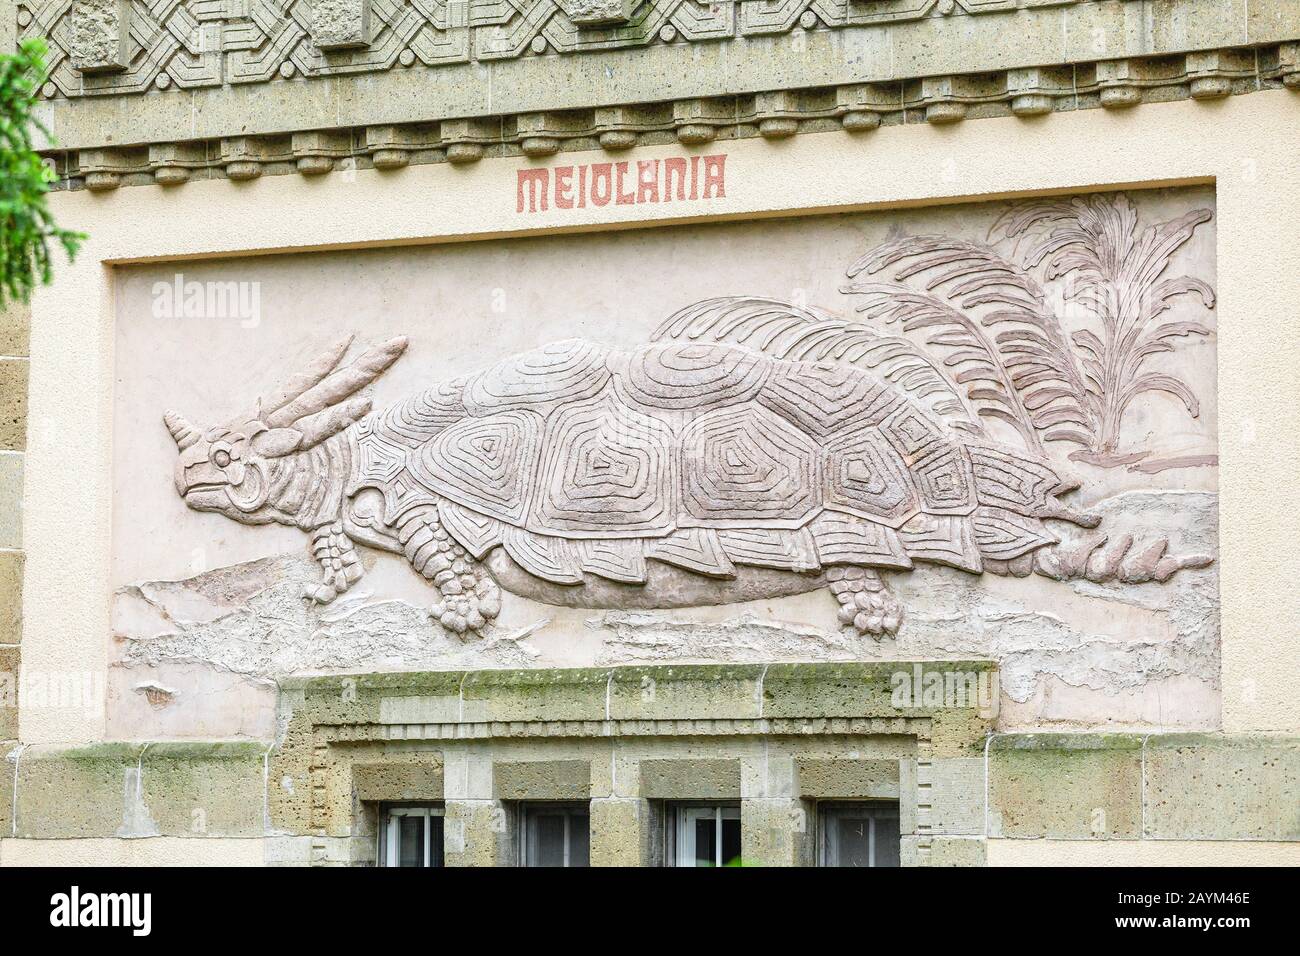 18 MAY 2018, BERLIN, GERMANY: Sculpture fossil of an Ancient prehistoric Turtle Meiolania in Berlin Zoo Stock Photo